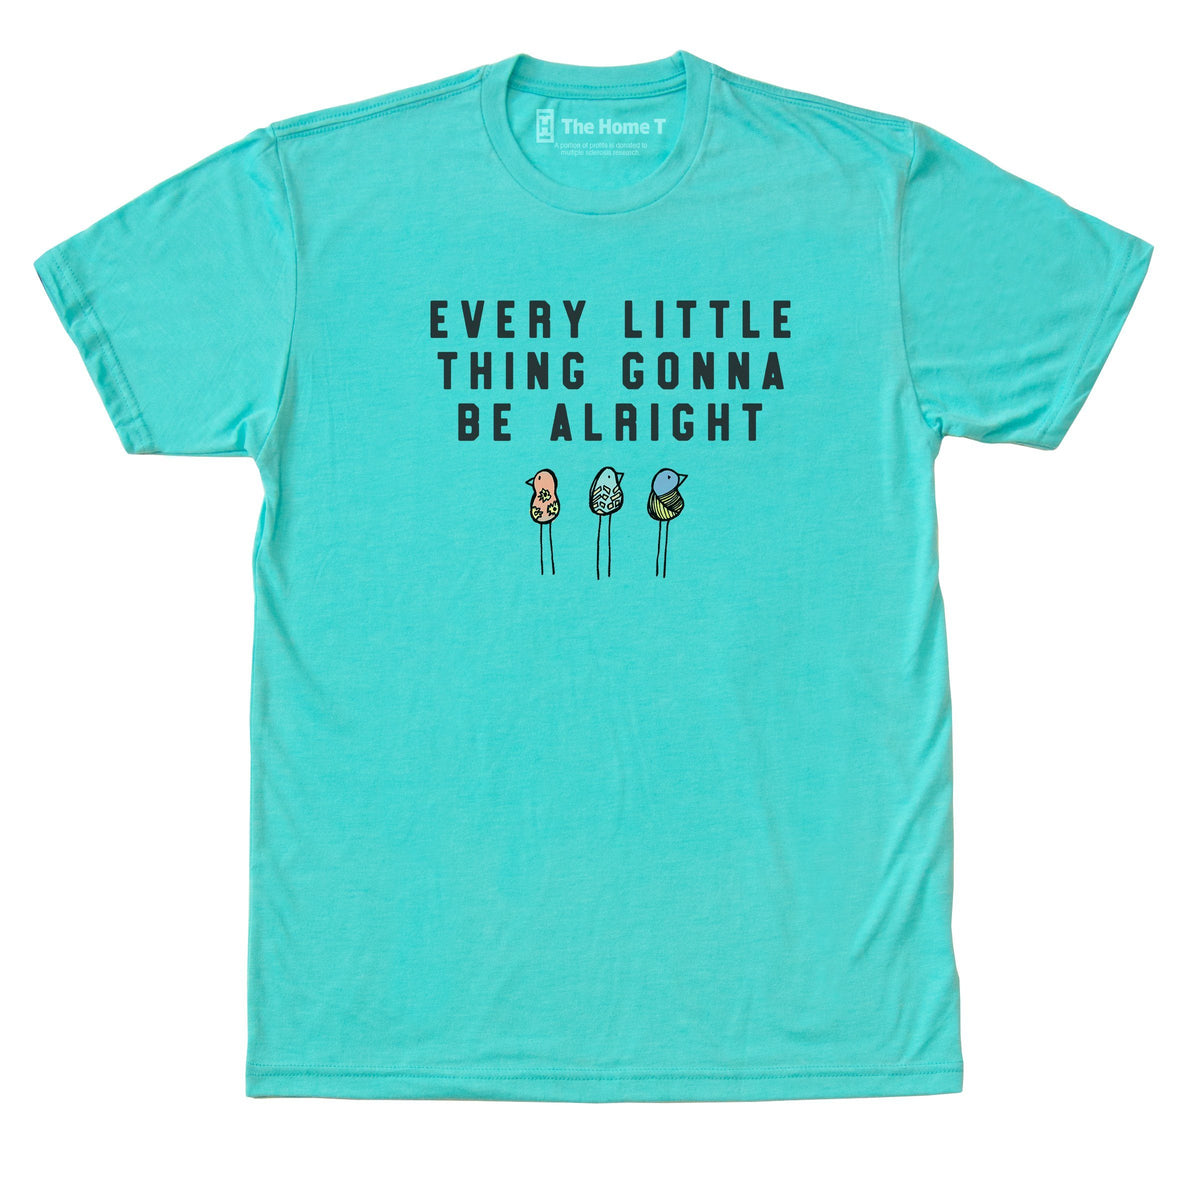 Every Little Thing - Aqua Limited Edition The Home T